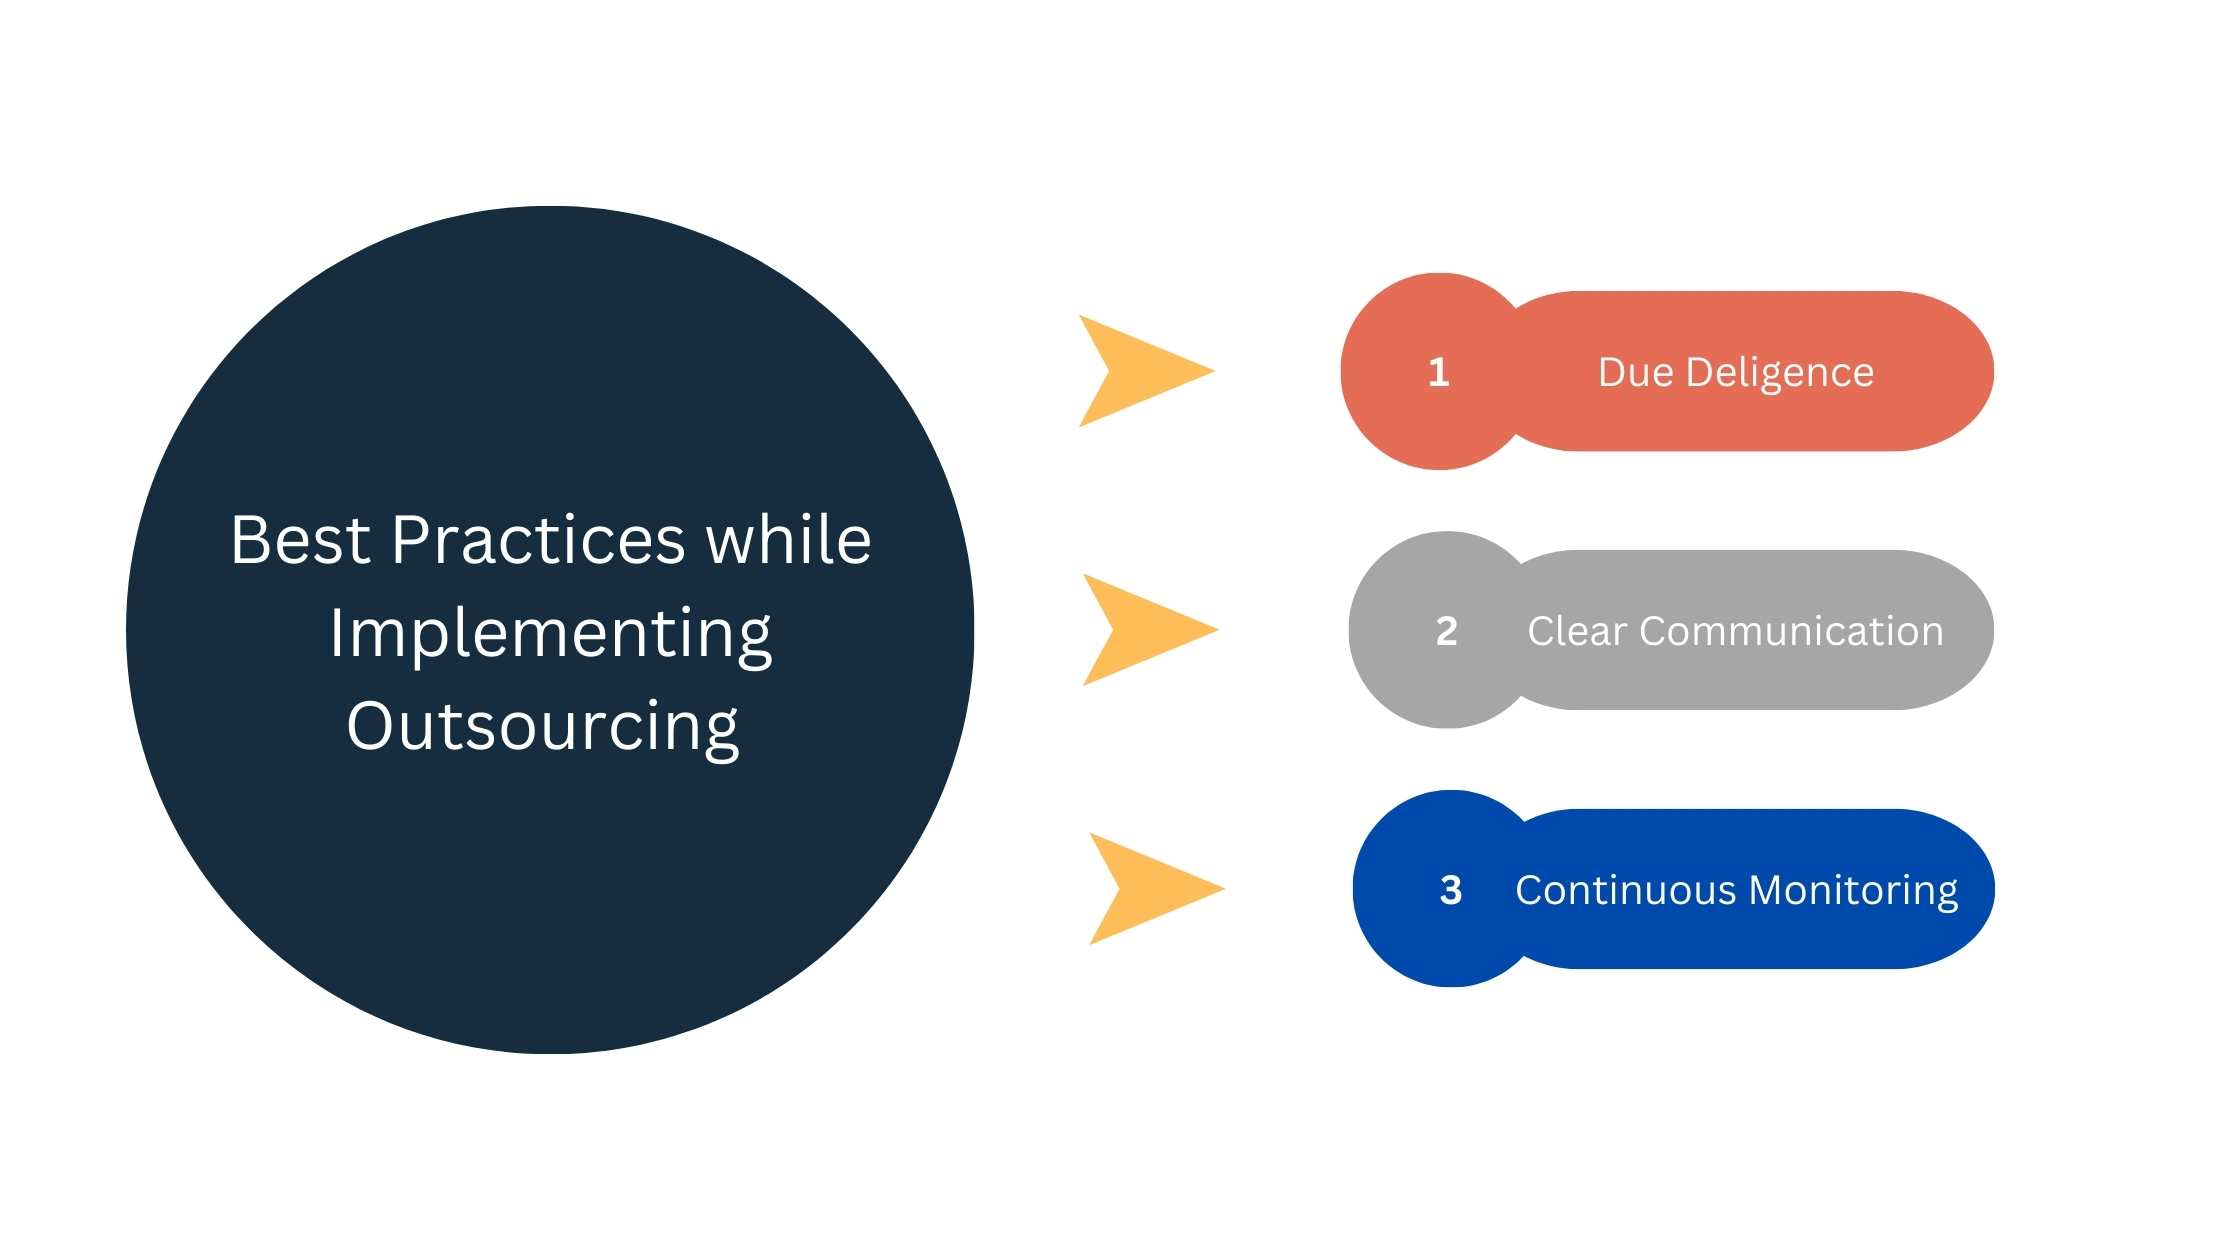 These are the best practices while implementing outsourcing